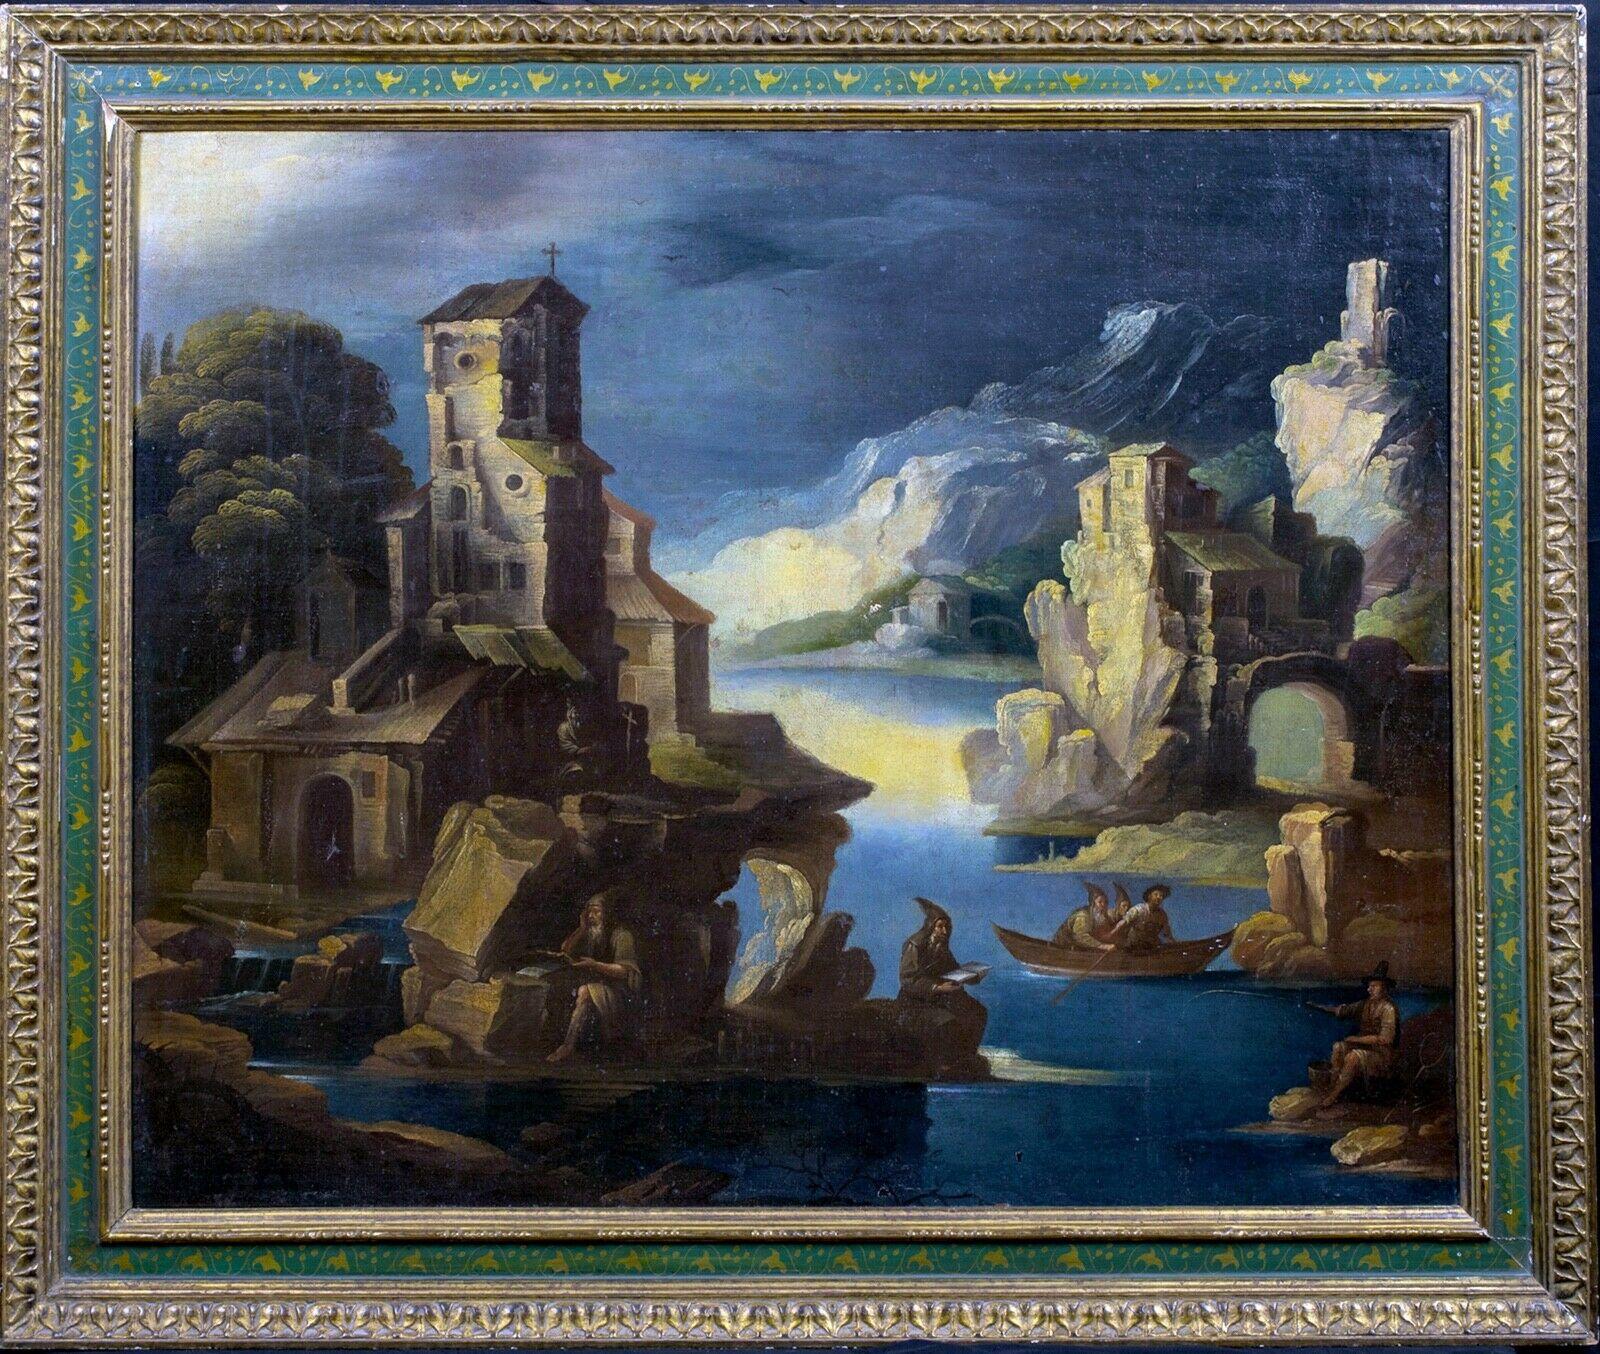 Monks In A Capriccio Rocky Landscape, 16th Century - Painting by Unknown